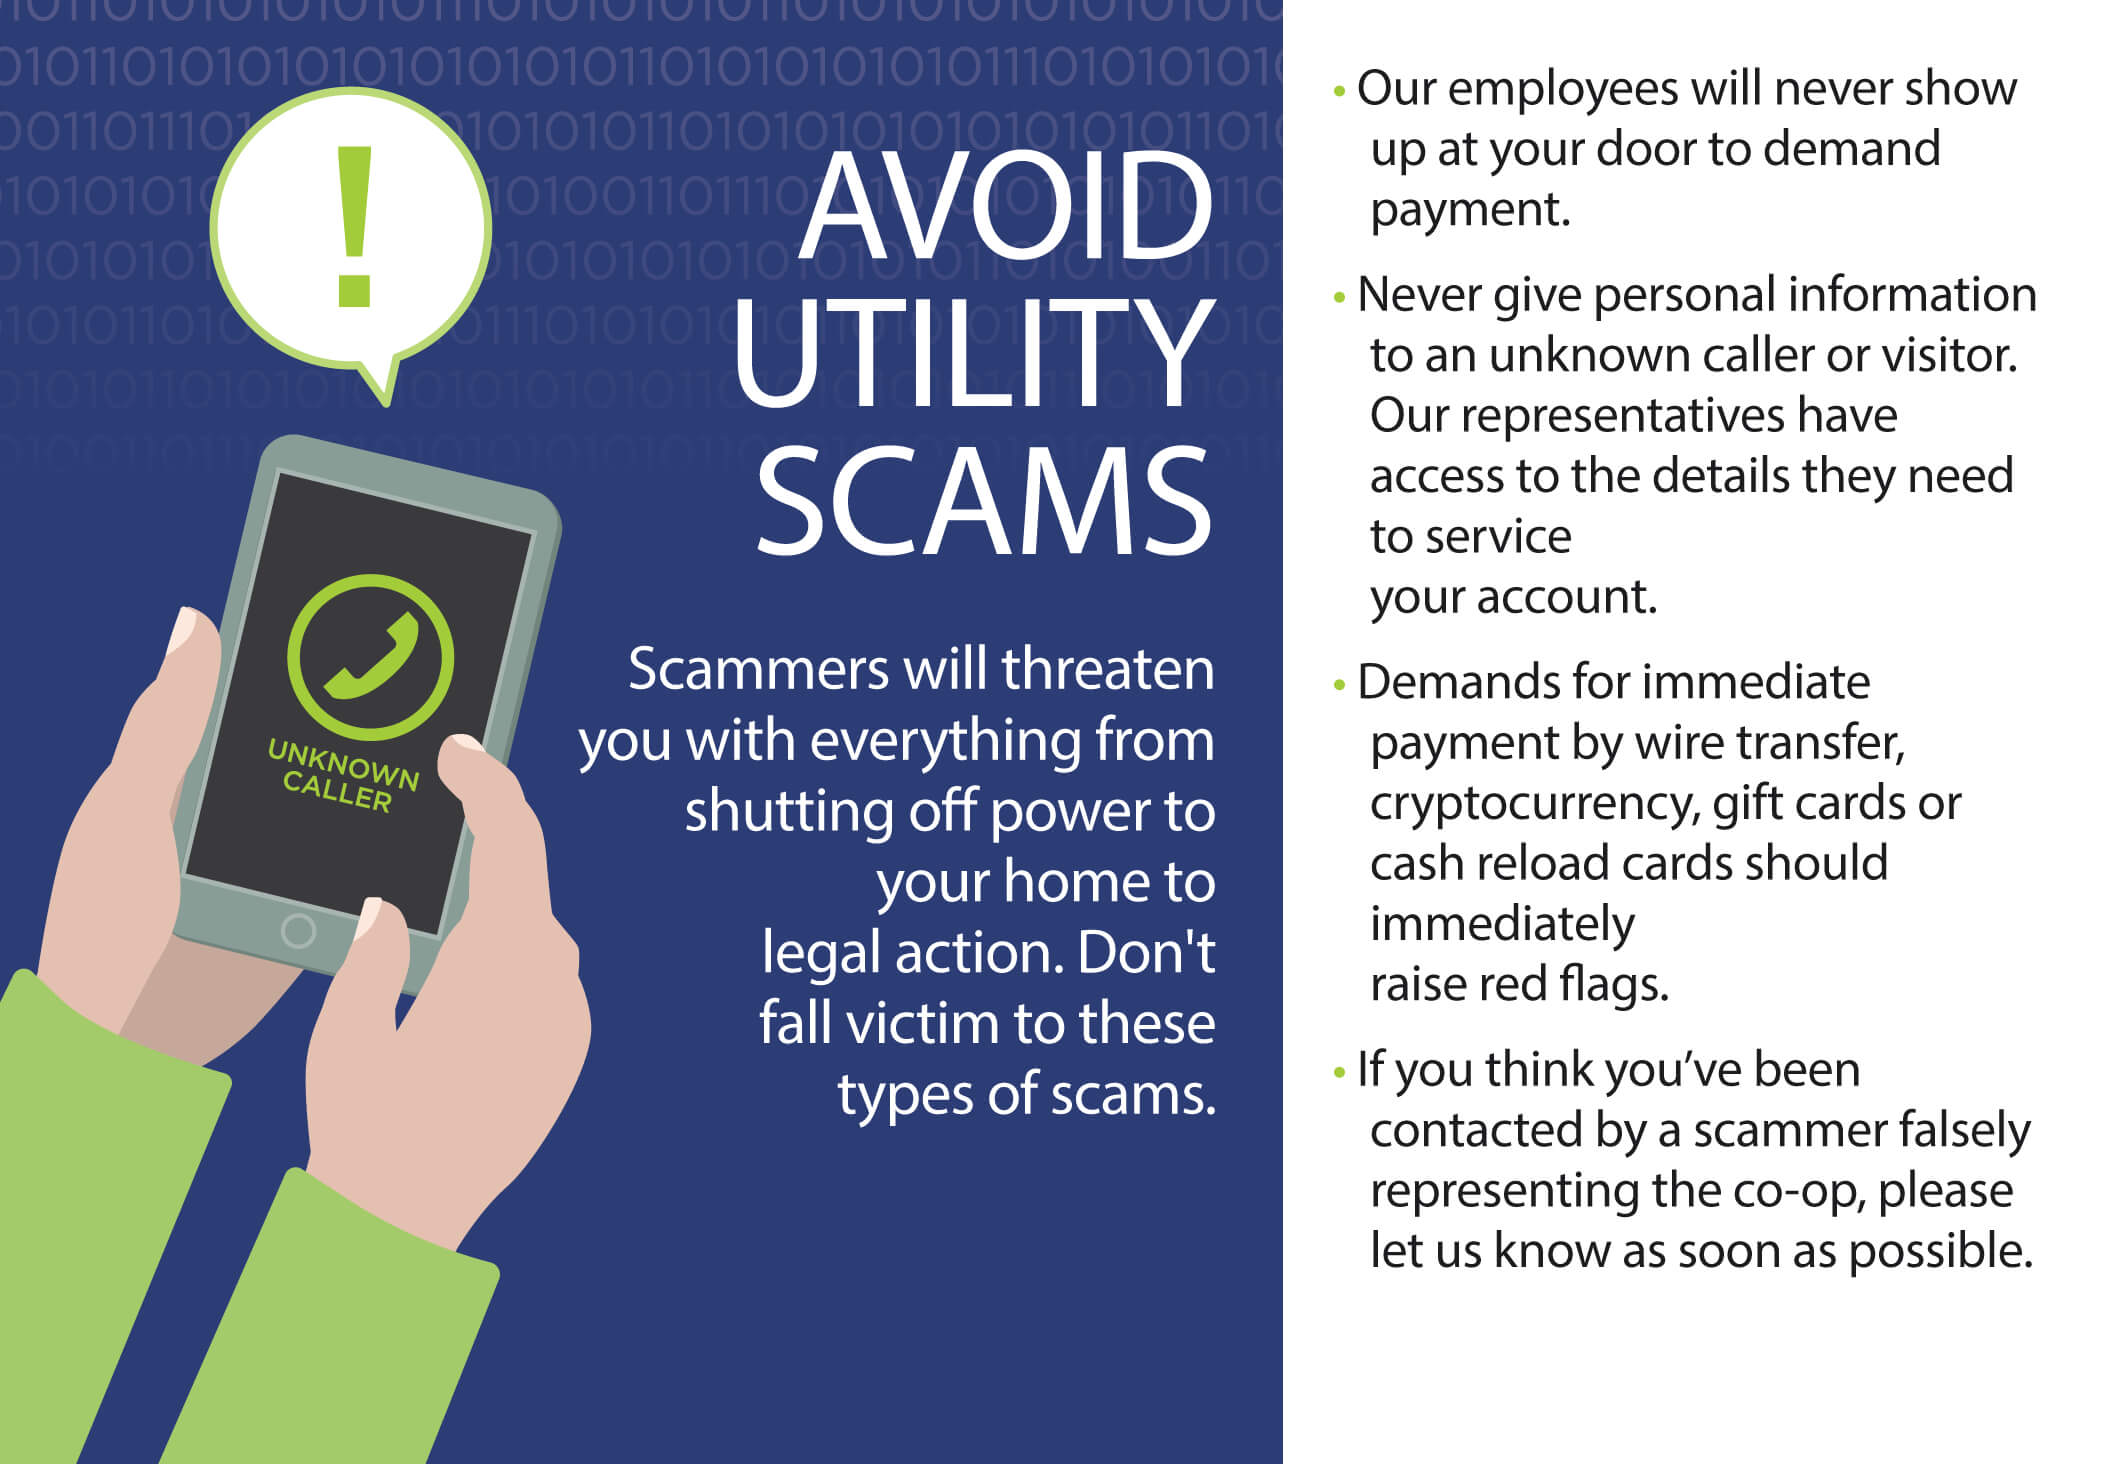 protect-yourself-from-popular-utility-scams-southwest-rural-electric